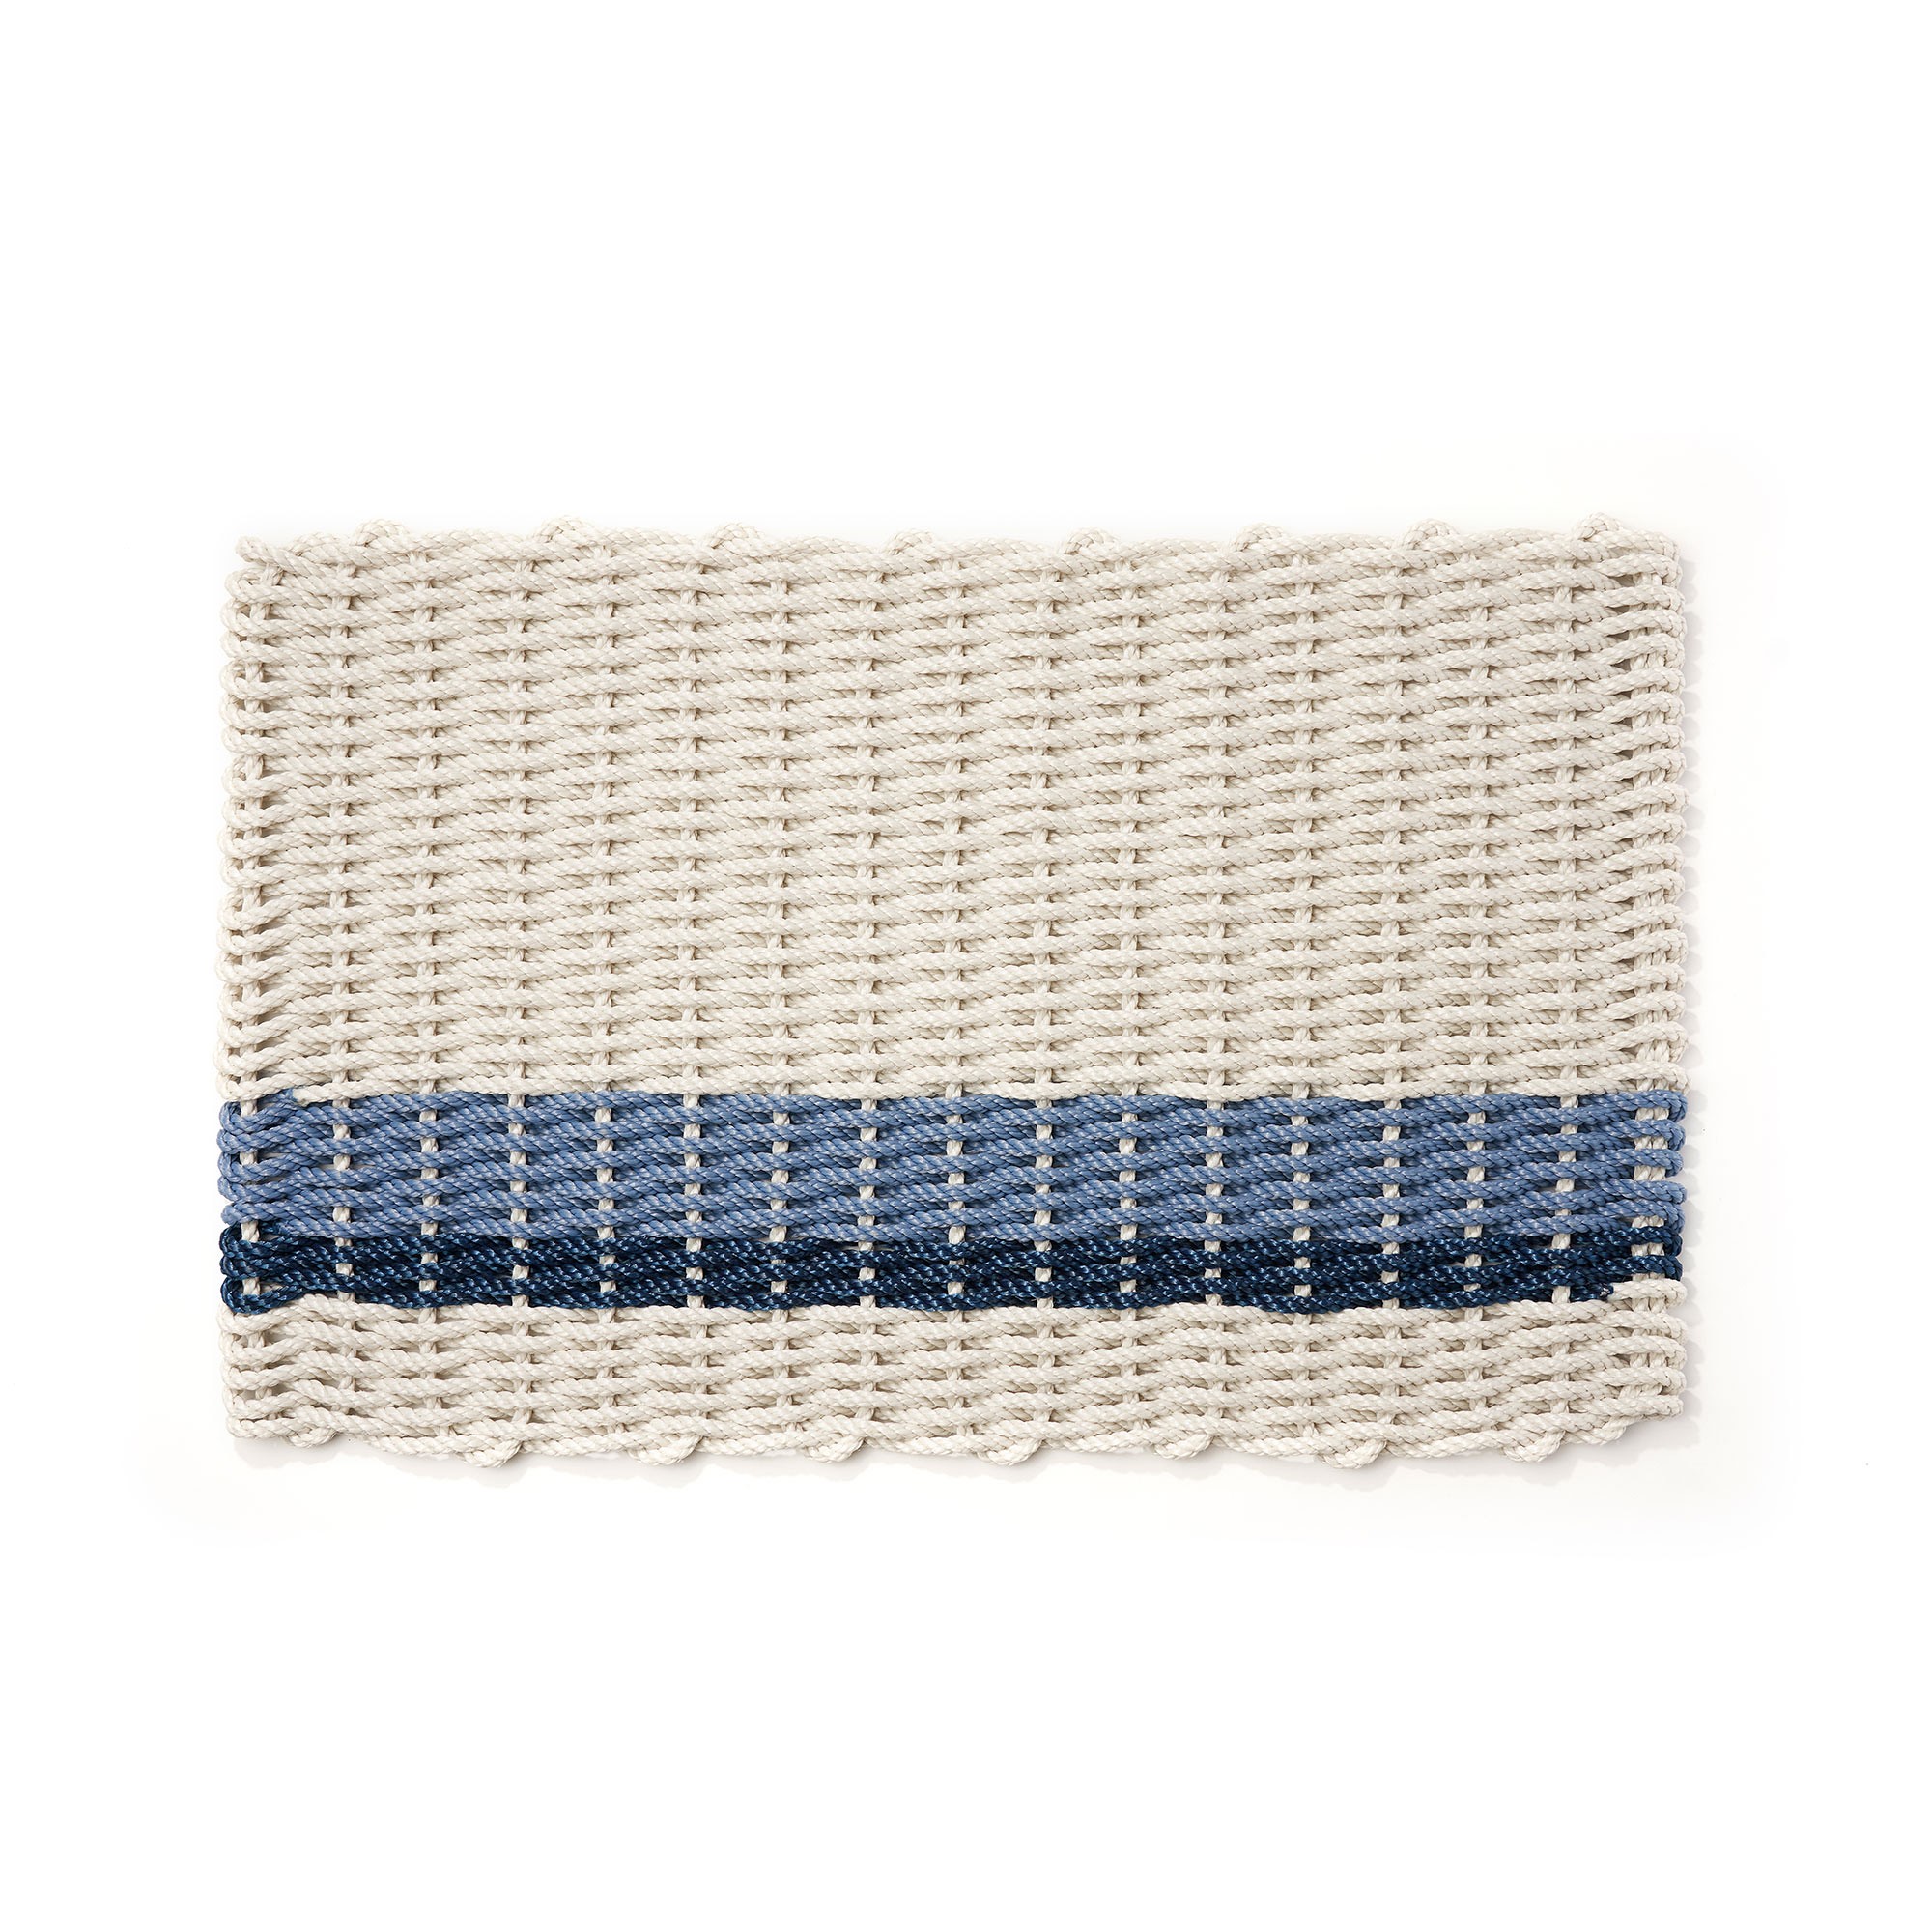 The Rope Co. Oyster with Glacier Bay & Navy Stripes Doormat